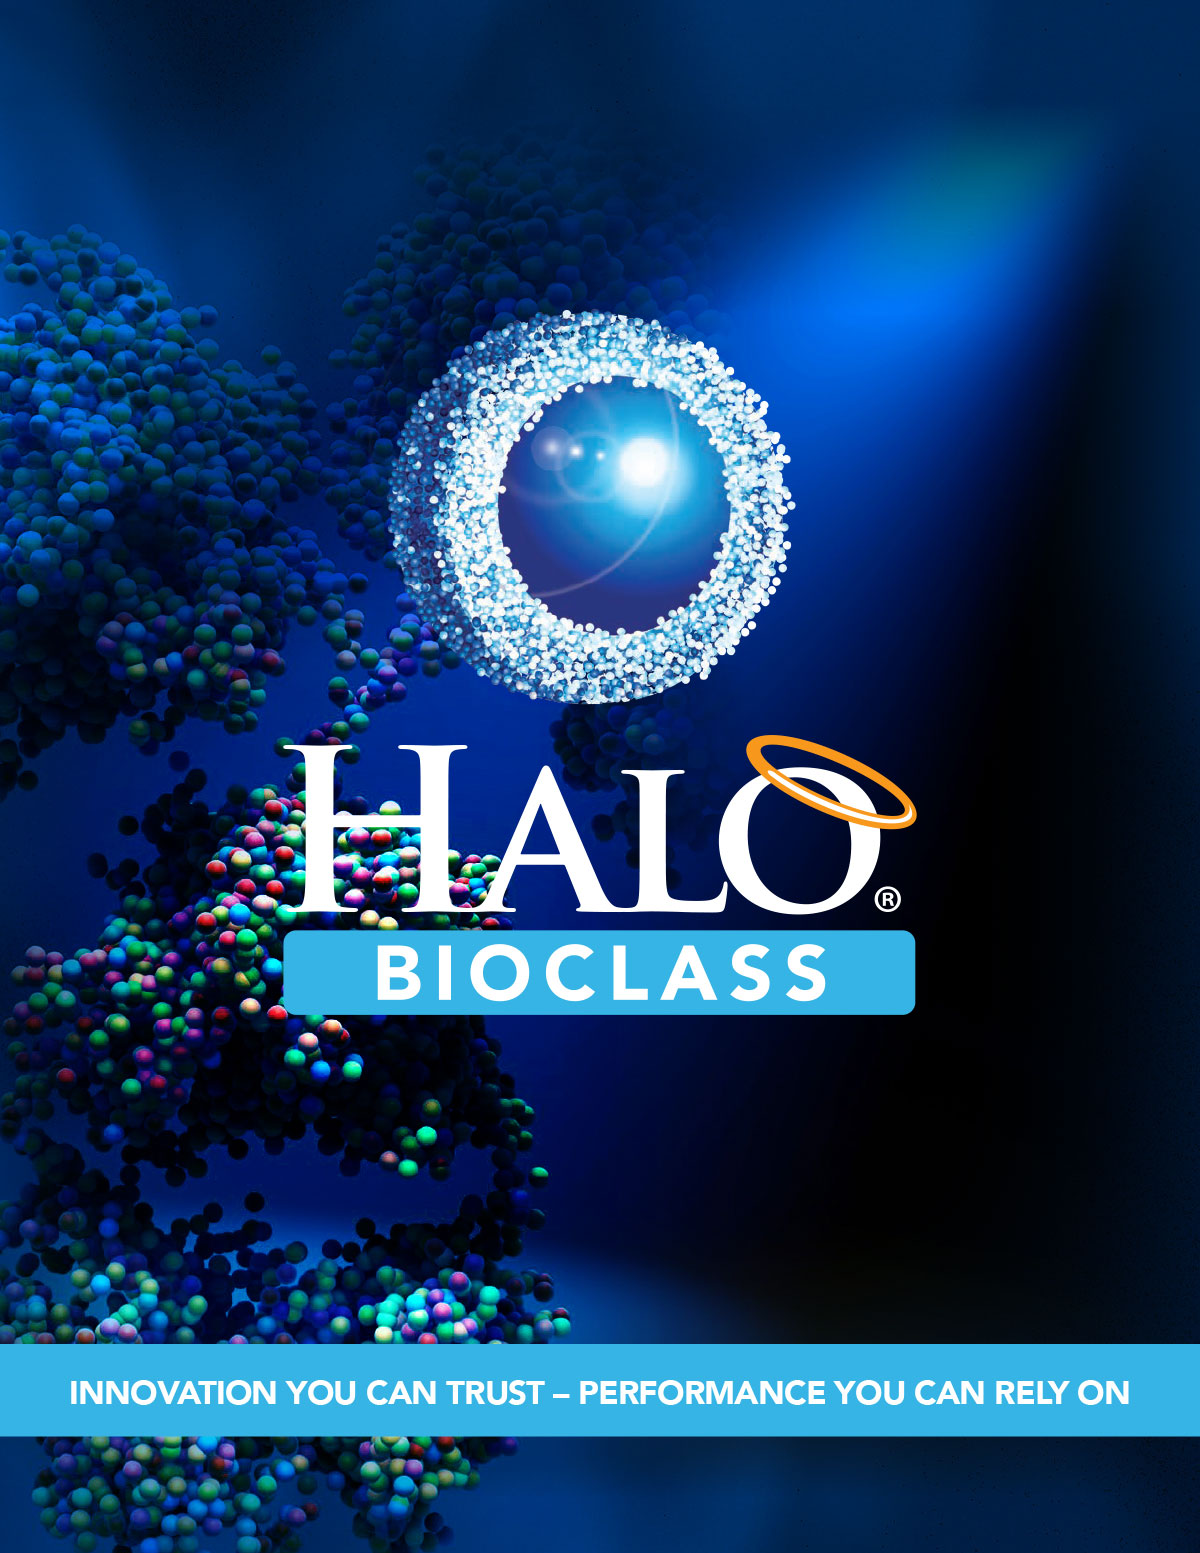 halo bioclass for glycan analysis, peptide separations and protein separation